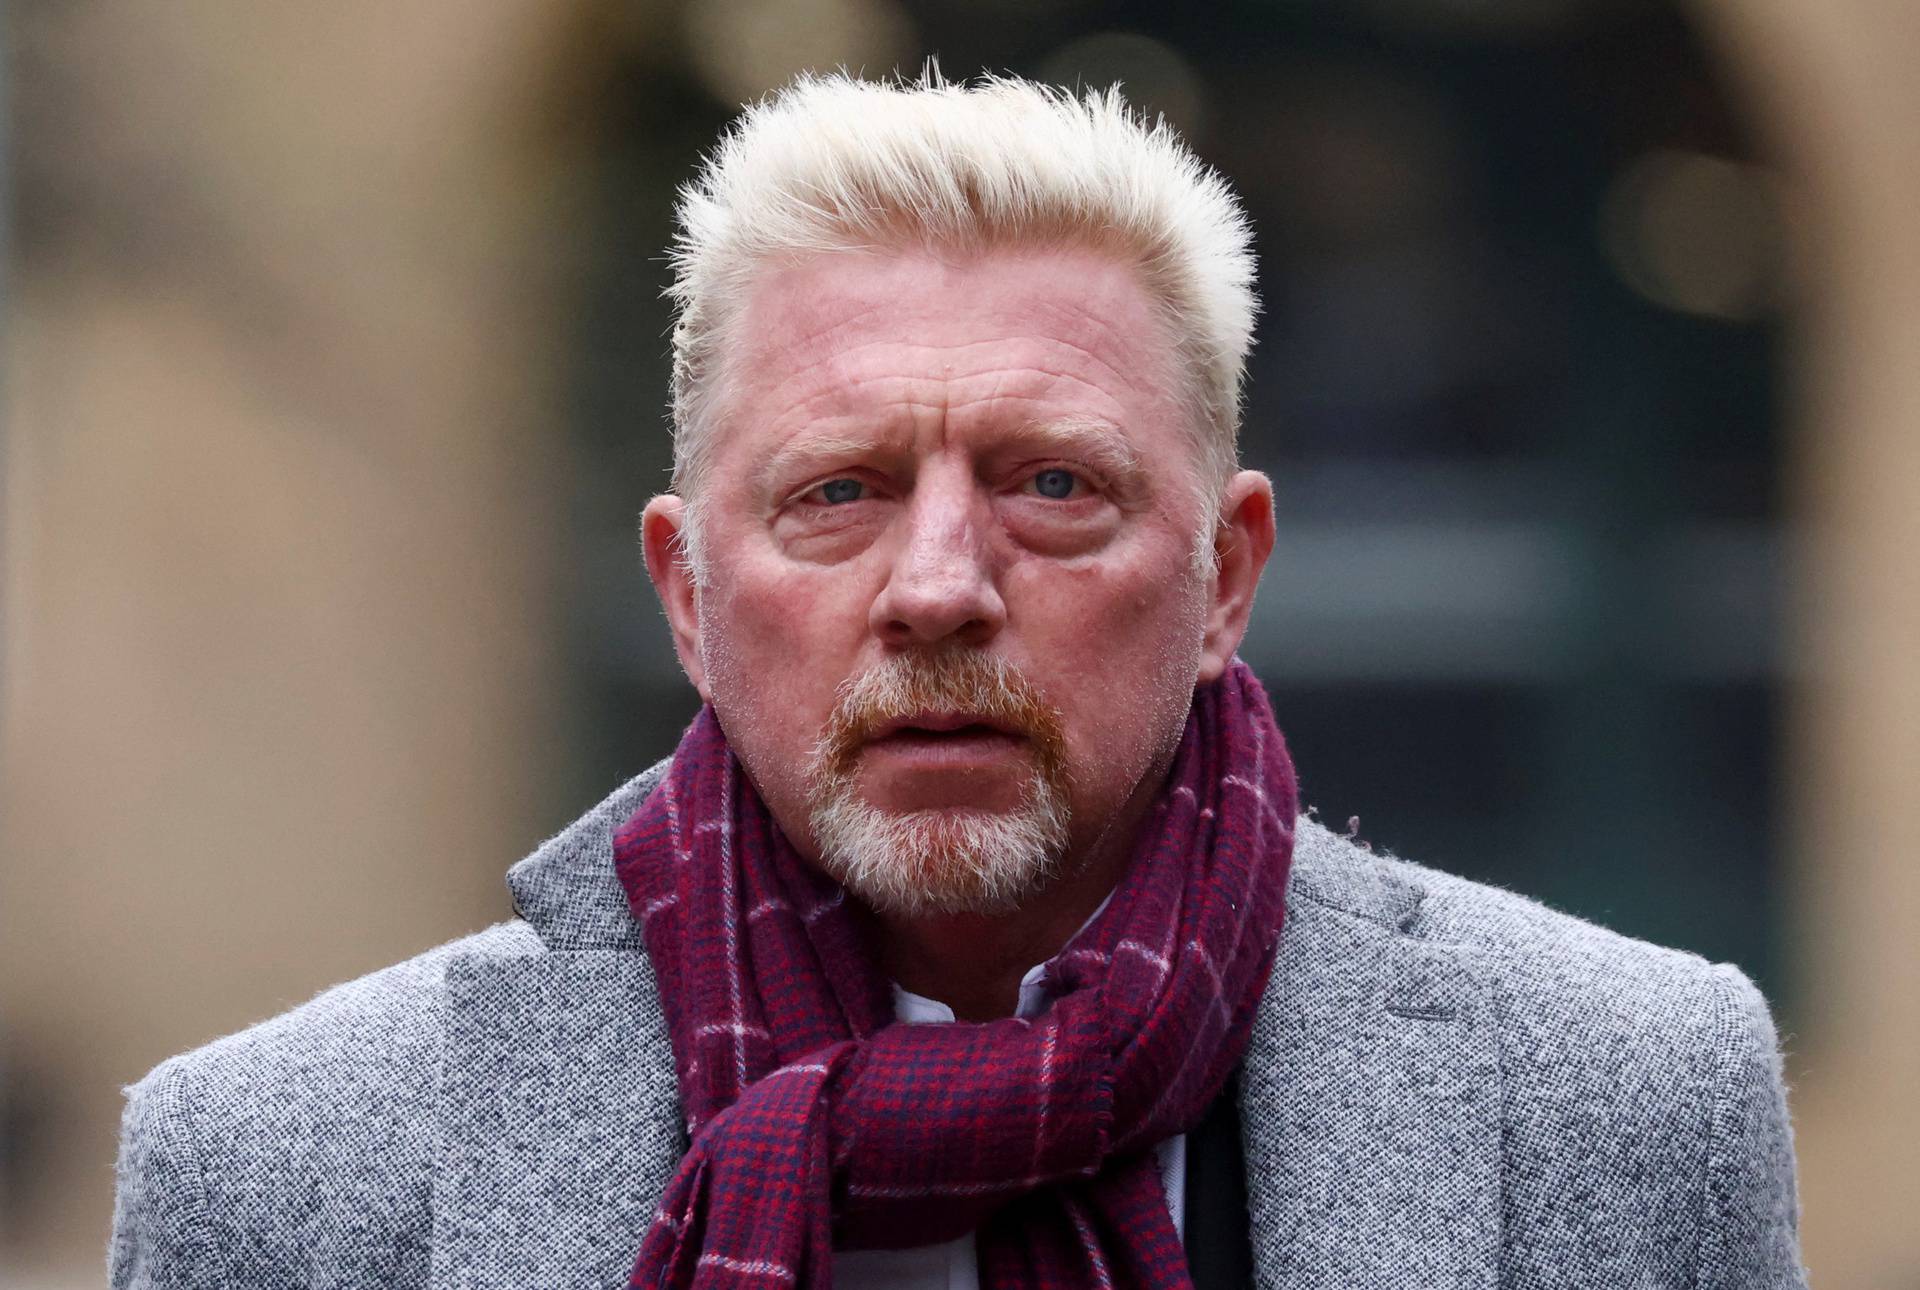 Former tennis player Boris Becker arrives at Southwark Crown Court for his bankruptcy offences trial in London